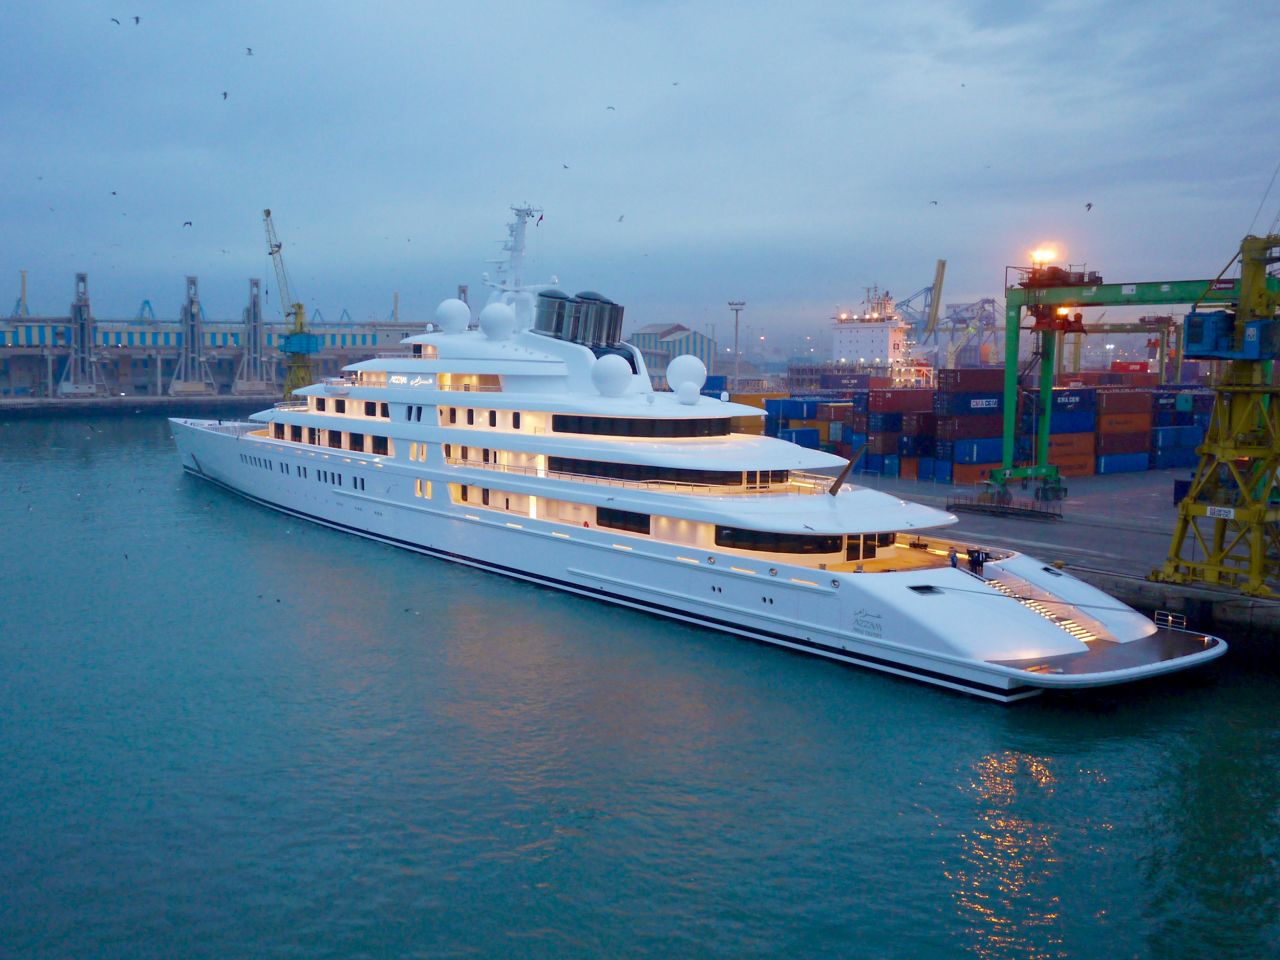 Superyacht Azzam, which measures 180 meters, is likely to cost its owners around $60 million per year to run.